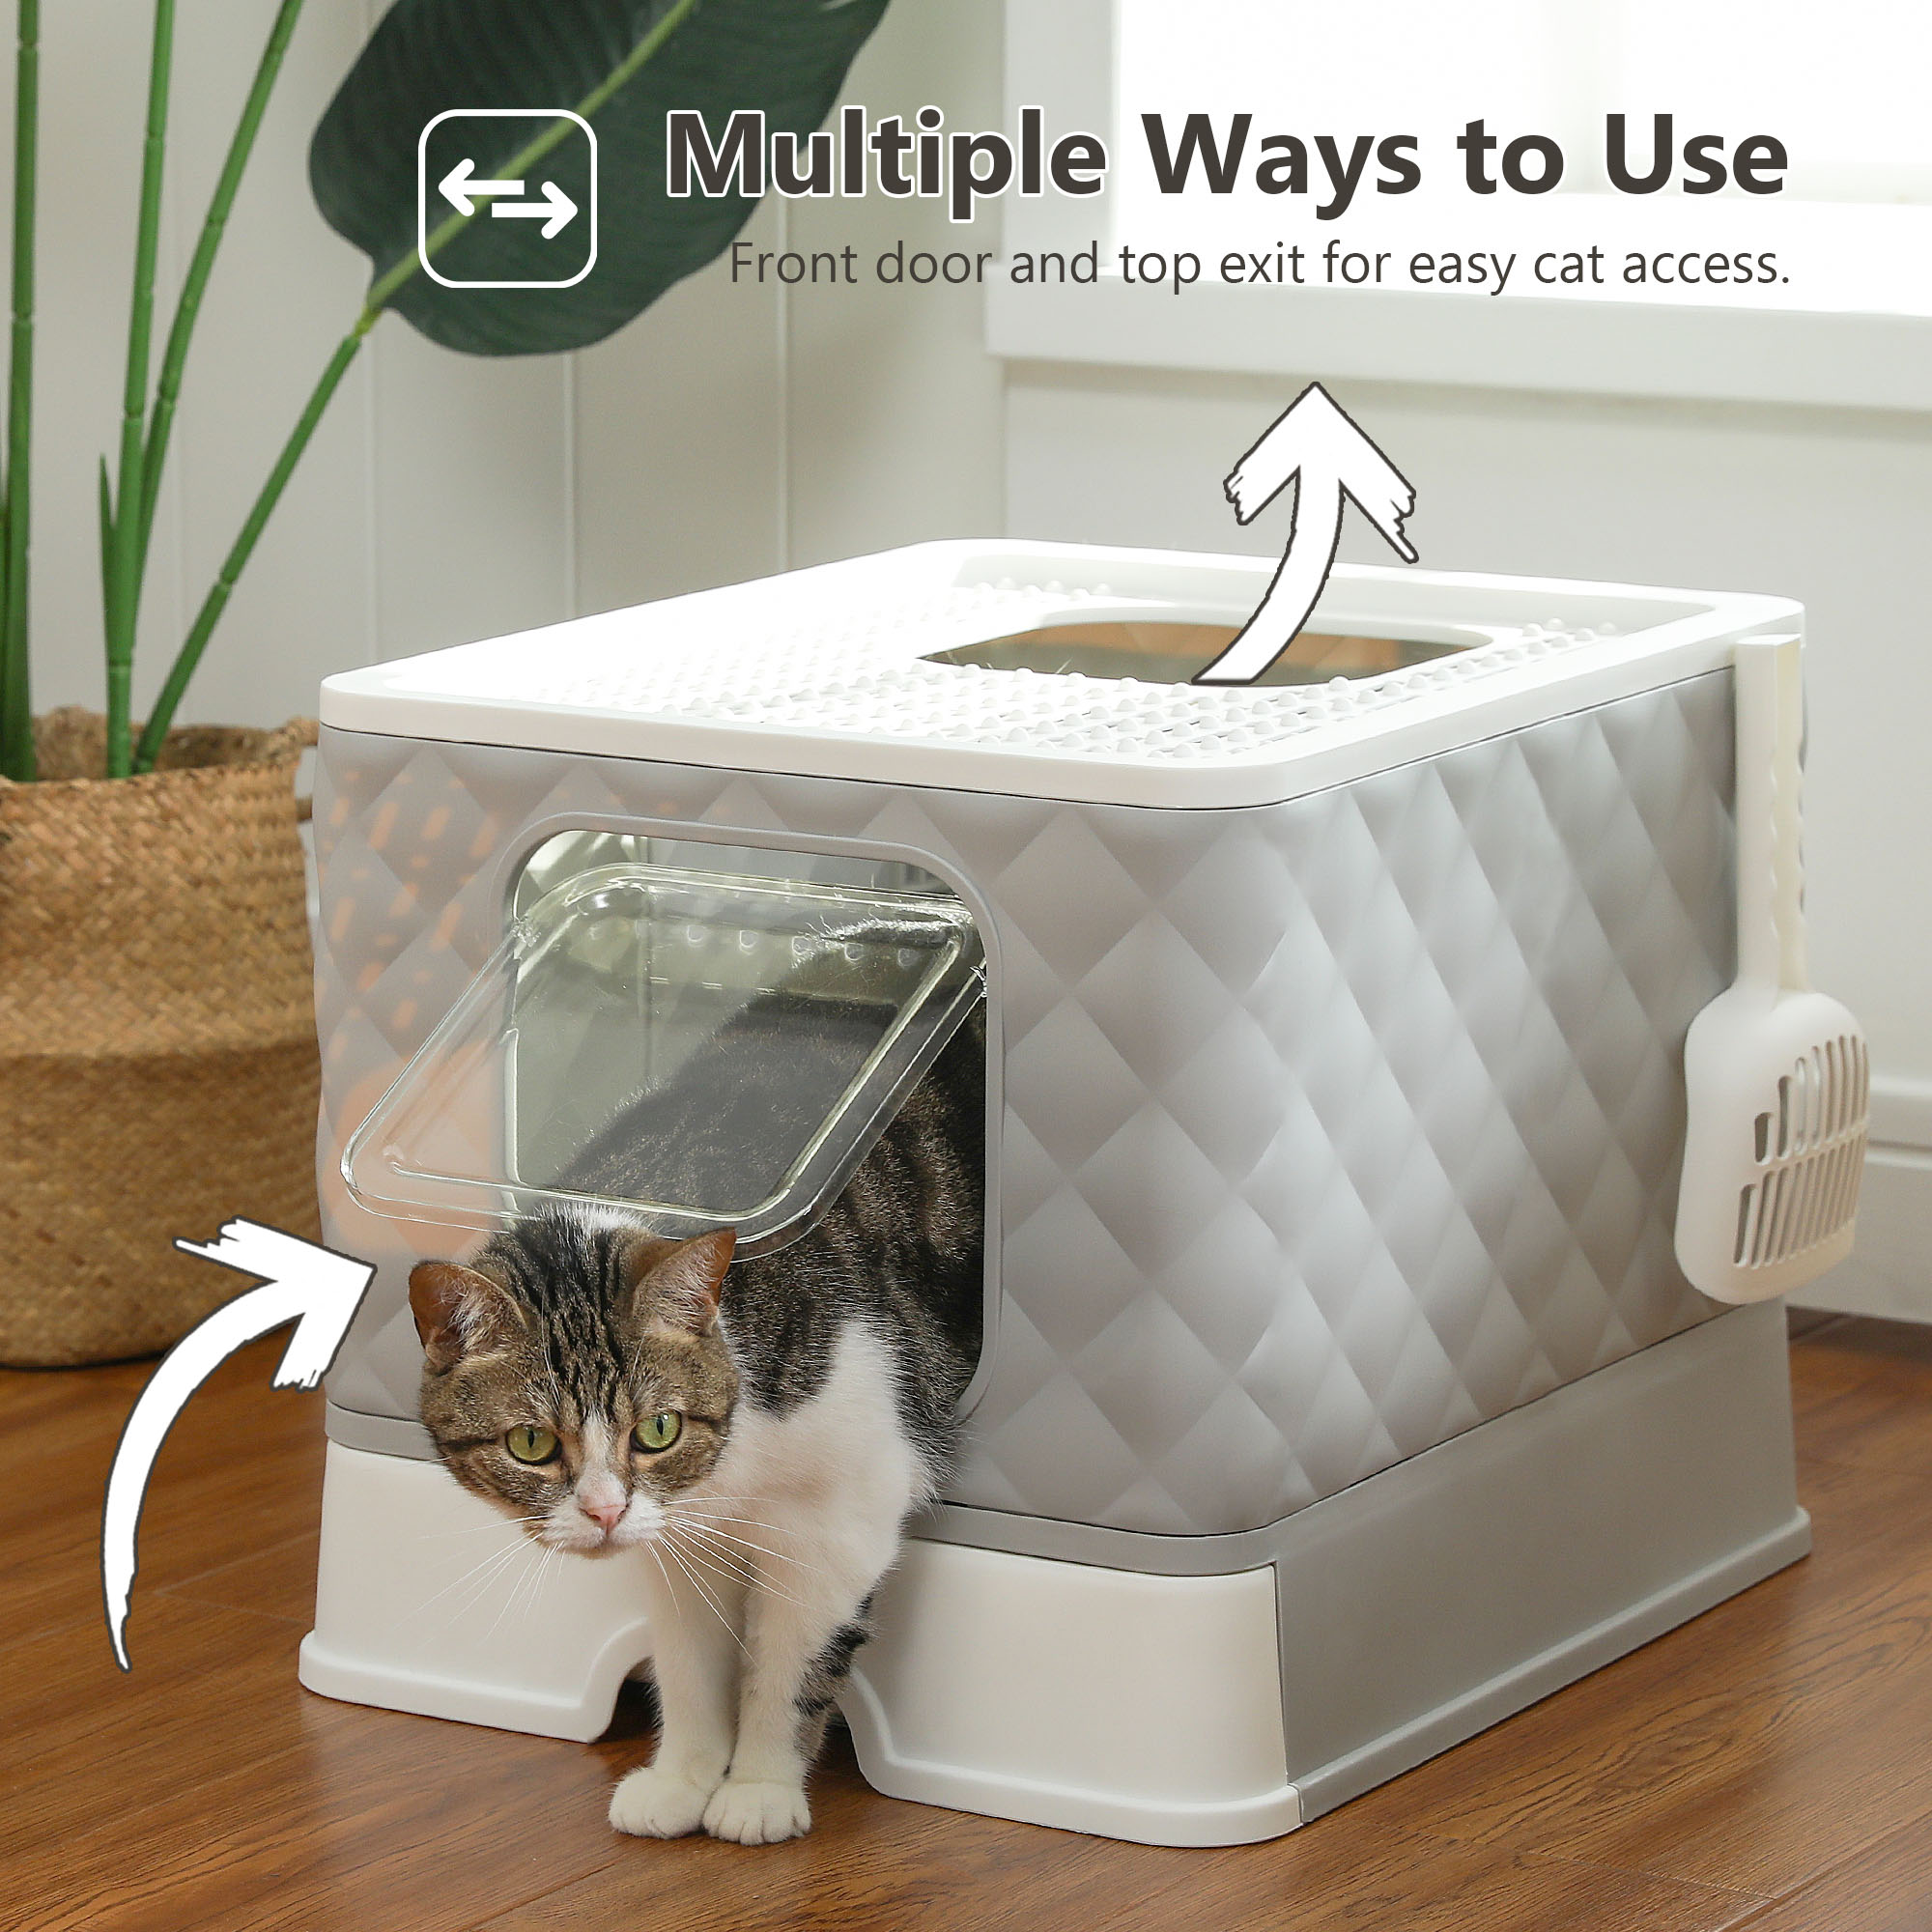 PAWZ Road Enclosed Cat Litter Box Large with Lid Drawer Type Easy to Clean,Gray - image 5 of 13